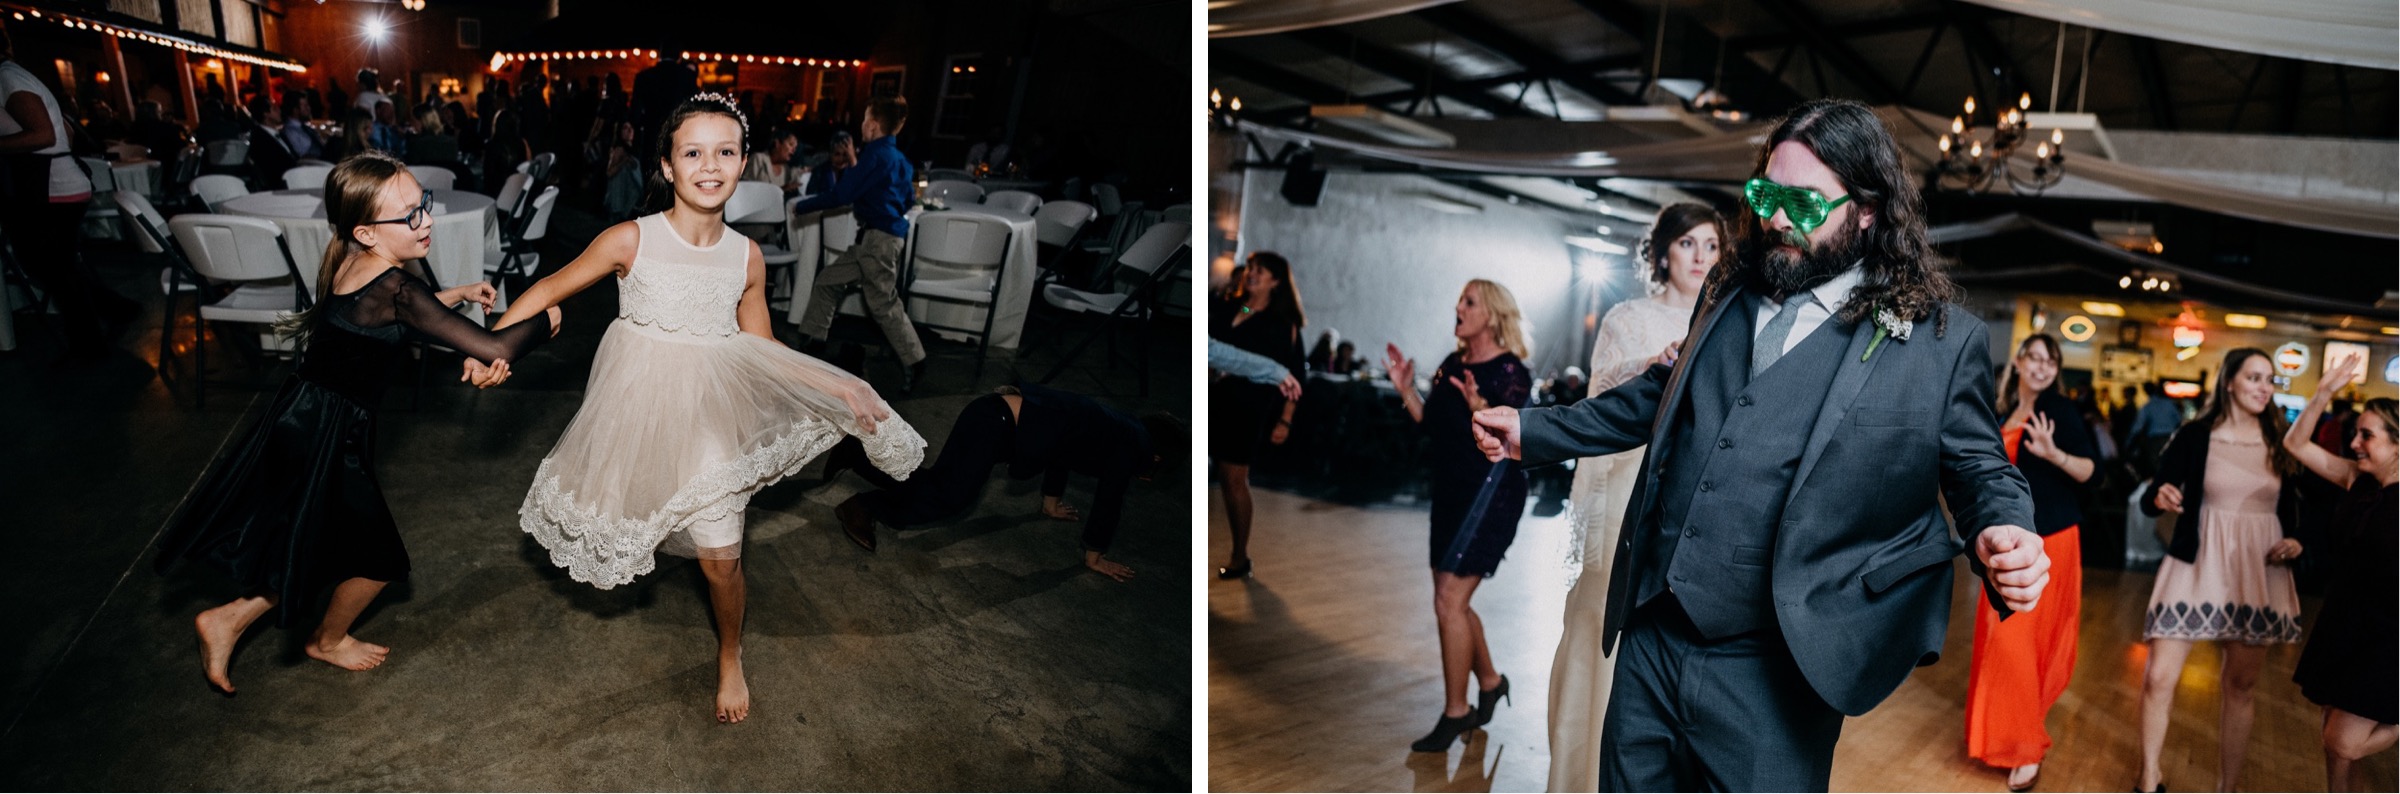 Guests dance and have fun during the reception portion of the wedding day timeline